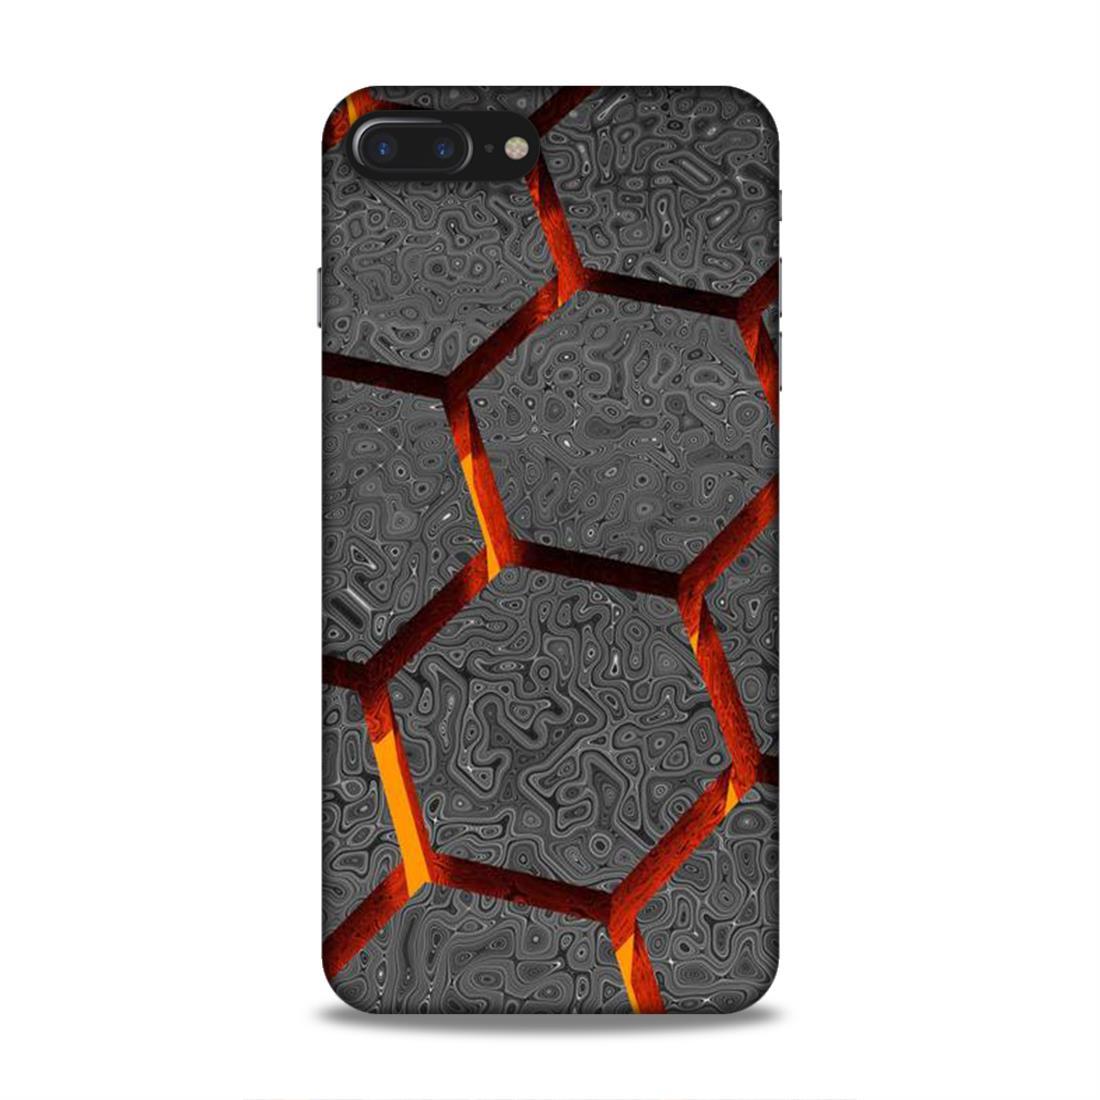 Hexagon Pattern iPhone 7 Plus Phone Case Cover